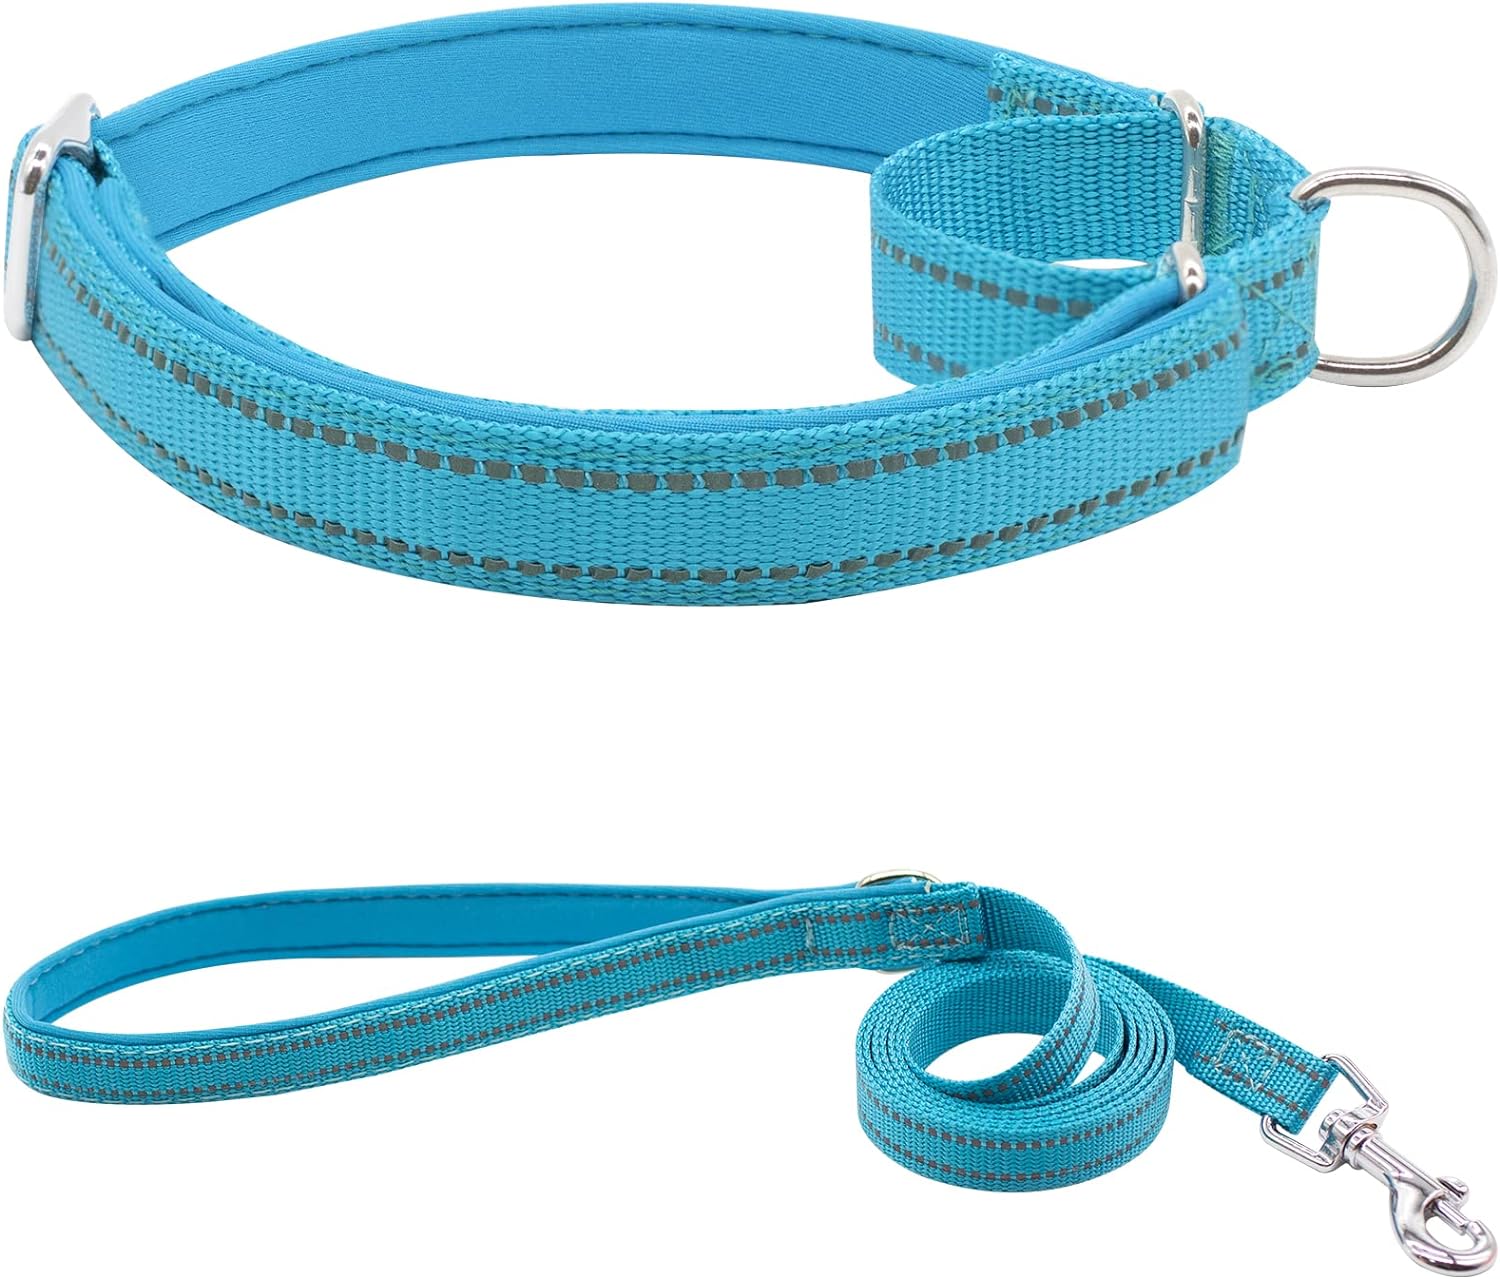 Nylon Martingale Dog Collar, Adjustable Reflective Heavy Duty Safe Slip Pet Collars with Leash for Small Medium Large Dogs, Blue S